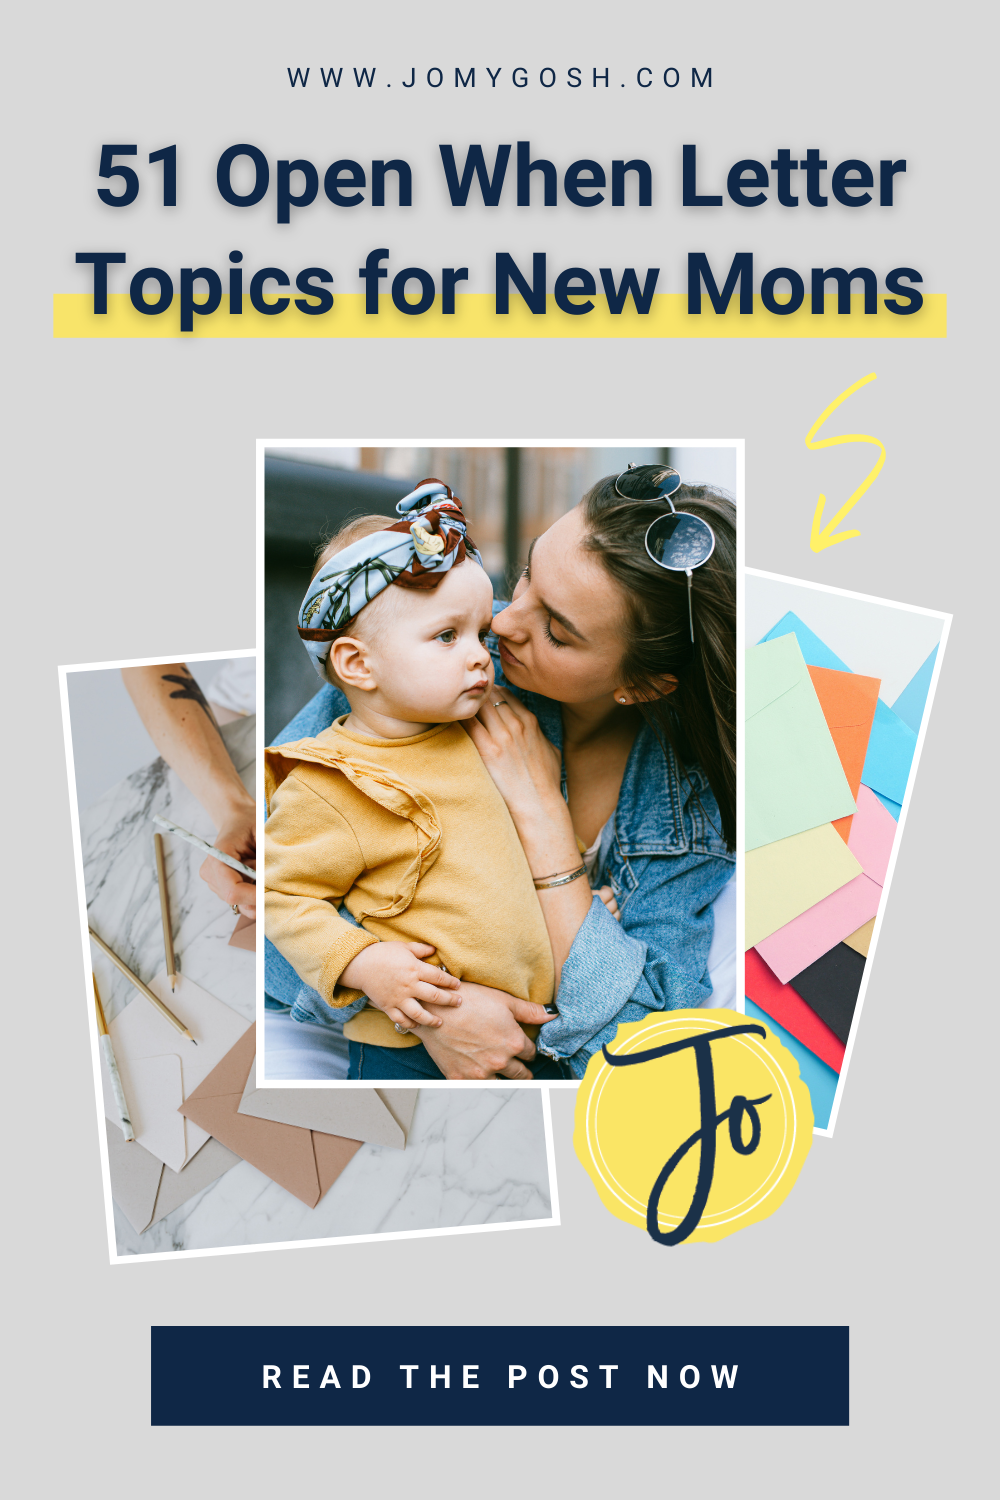 New moms need encouragement, laughs and love. Use these open when letters as a care package or a baby shower gift to make sure that your love can be with the special new mother or mom-to-be in your life, even when you can't be there at 2 AM feedings.